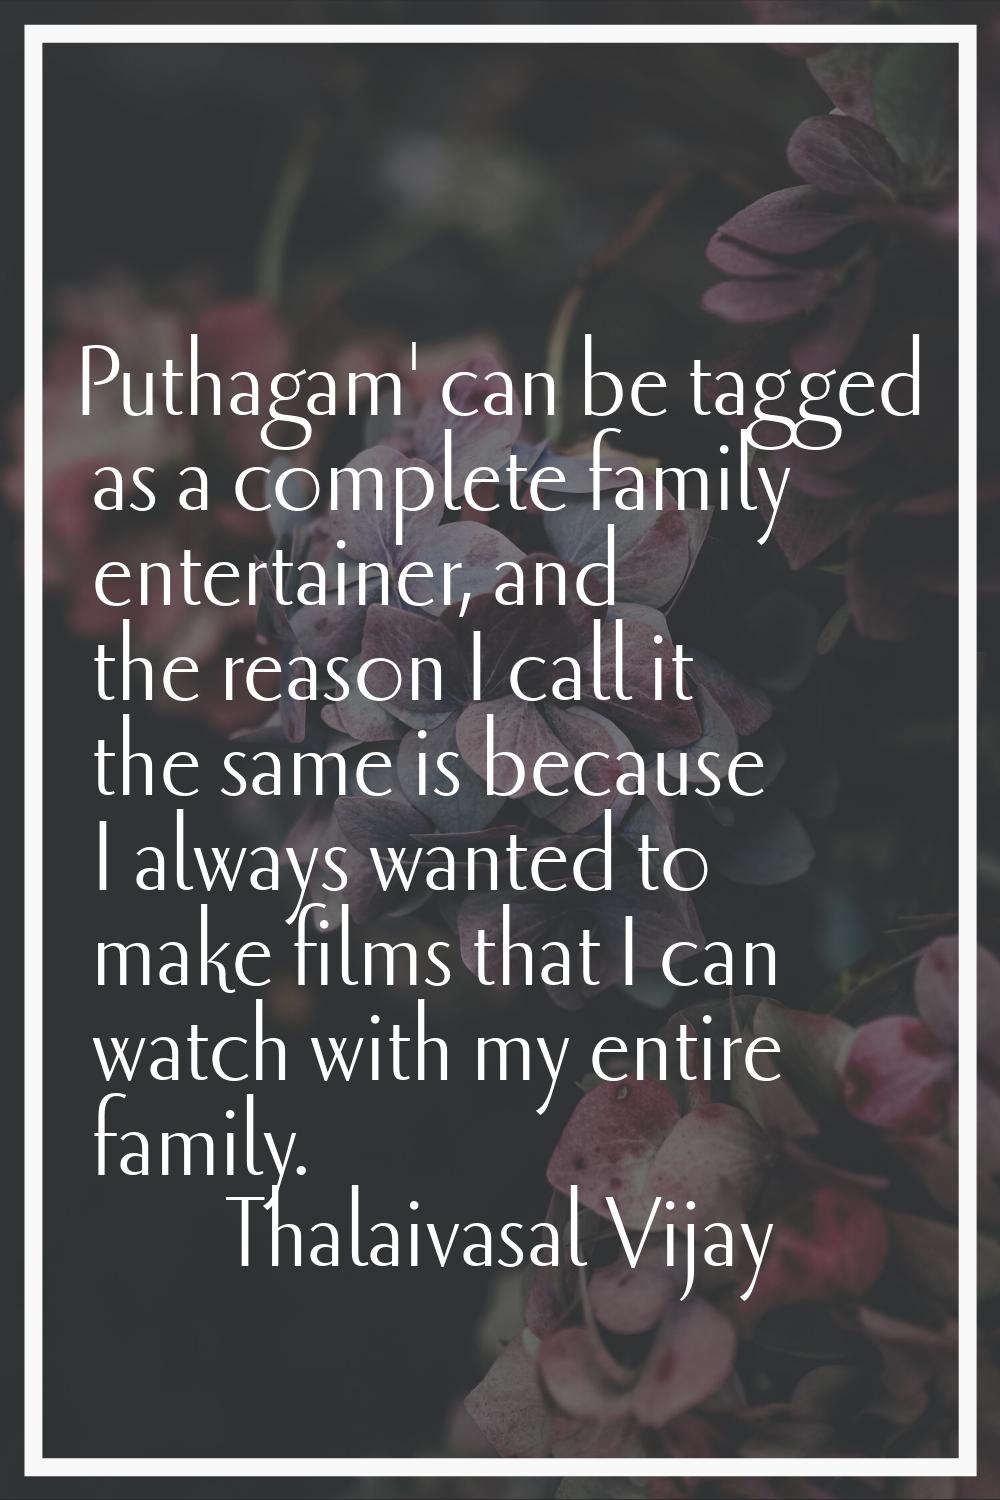 Puthagam' can be tagged as a complete family entertainer, and the reason I call it the same is beca